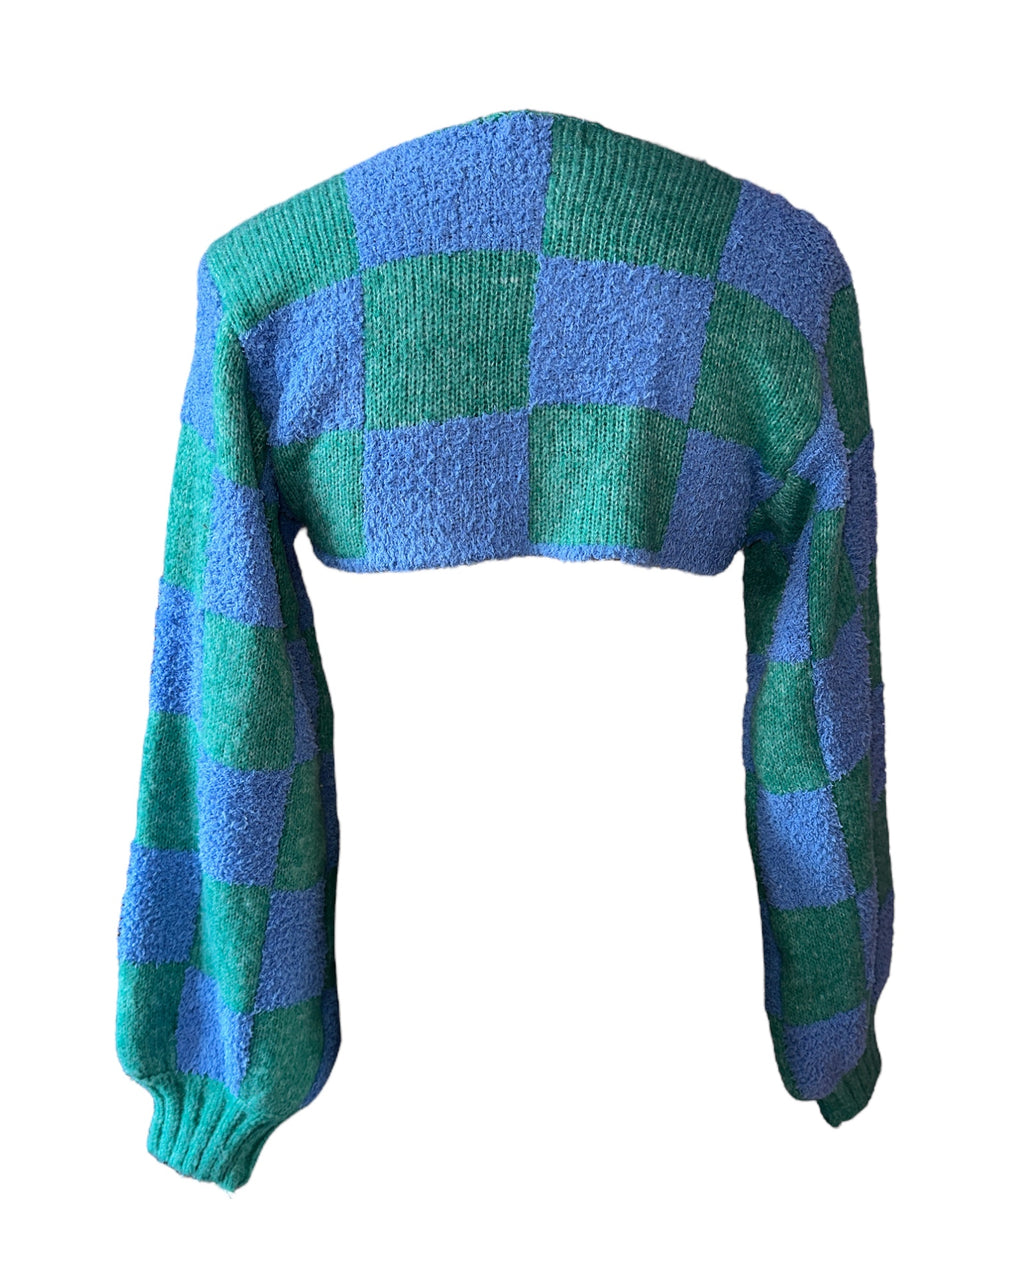 Green/Blue Checkered Pretty Little Thing Shrug Sweater, S